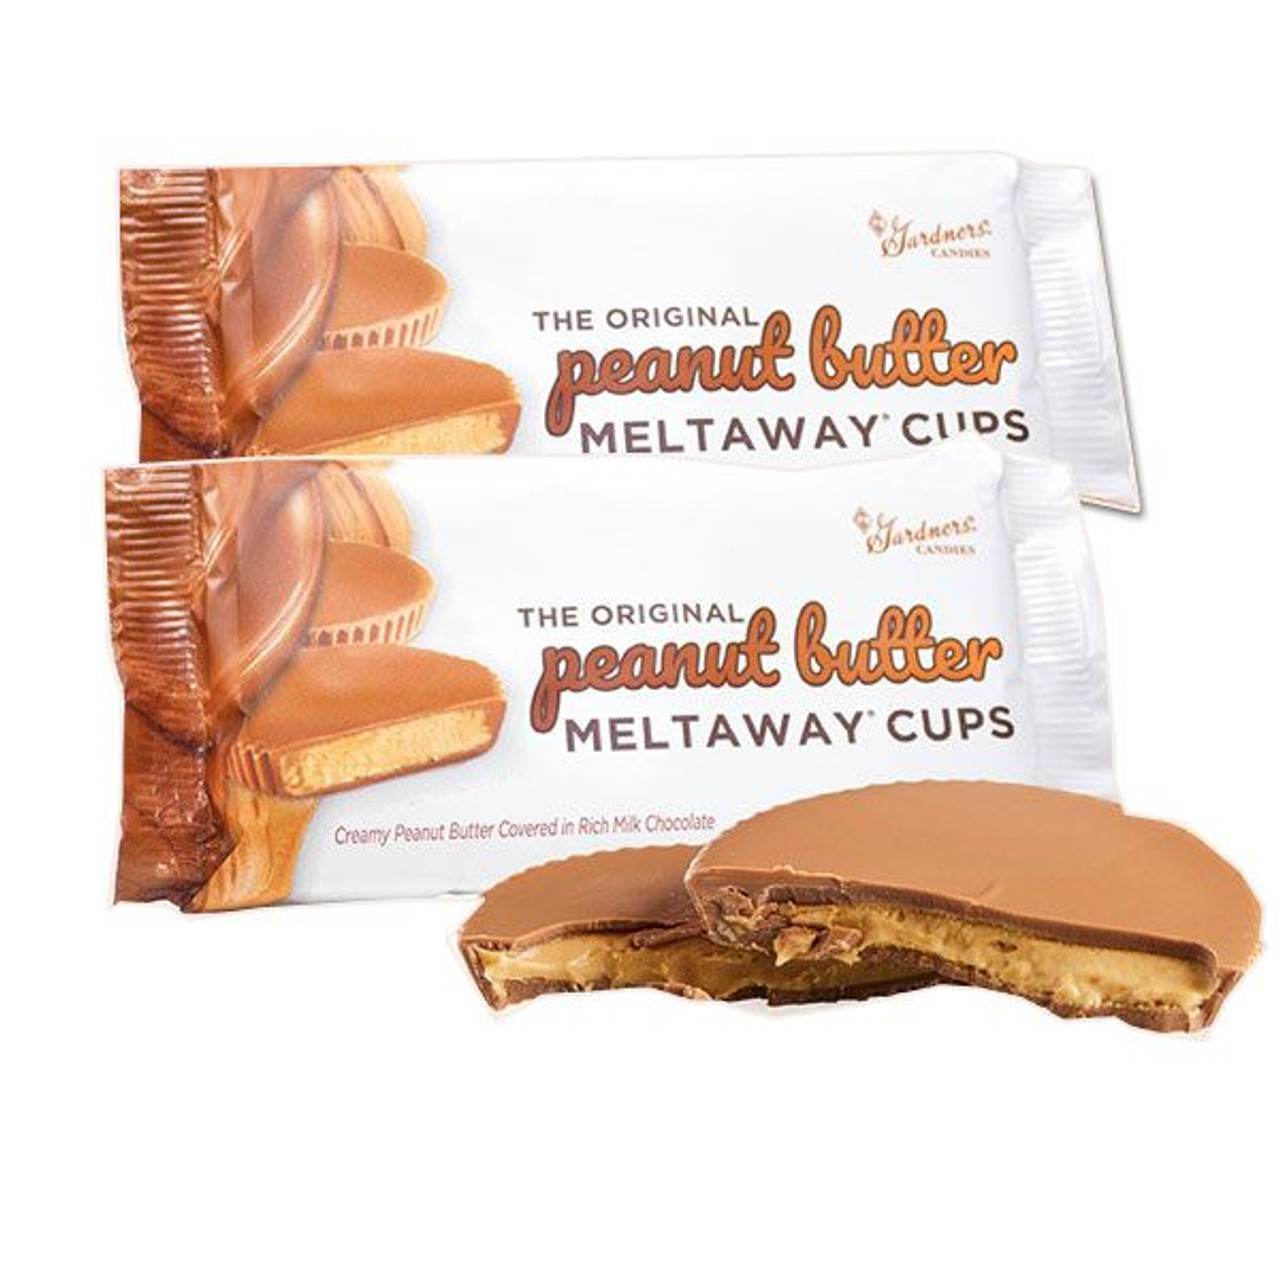 https://cdn11.bigcommerce.com/s-omwfd2x16c/images/stencil/1280x1280/products/6421/7217/gardner-s-peanut-butter-meltaway-cups-24-count-9__50114.1623945220.jpg?c=1